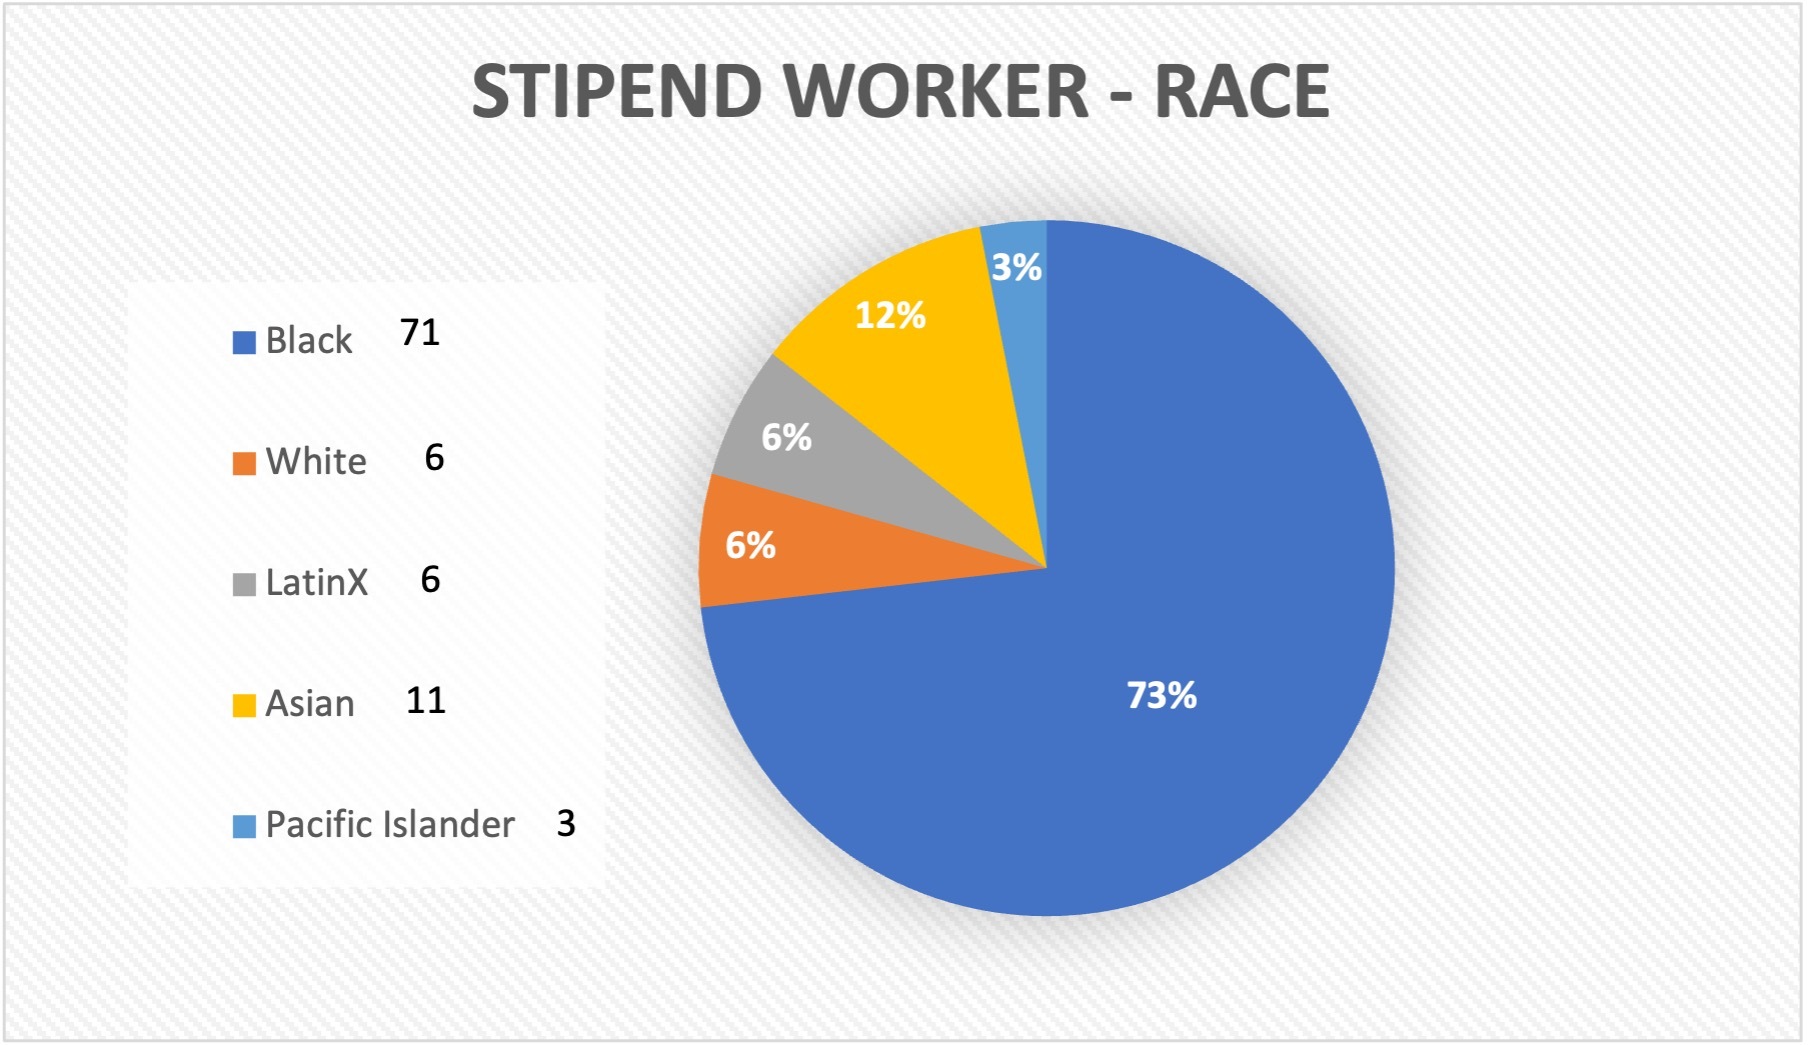 A pie chart showing the percentages of stipend workers based on race.